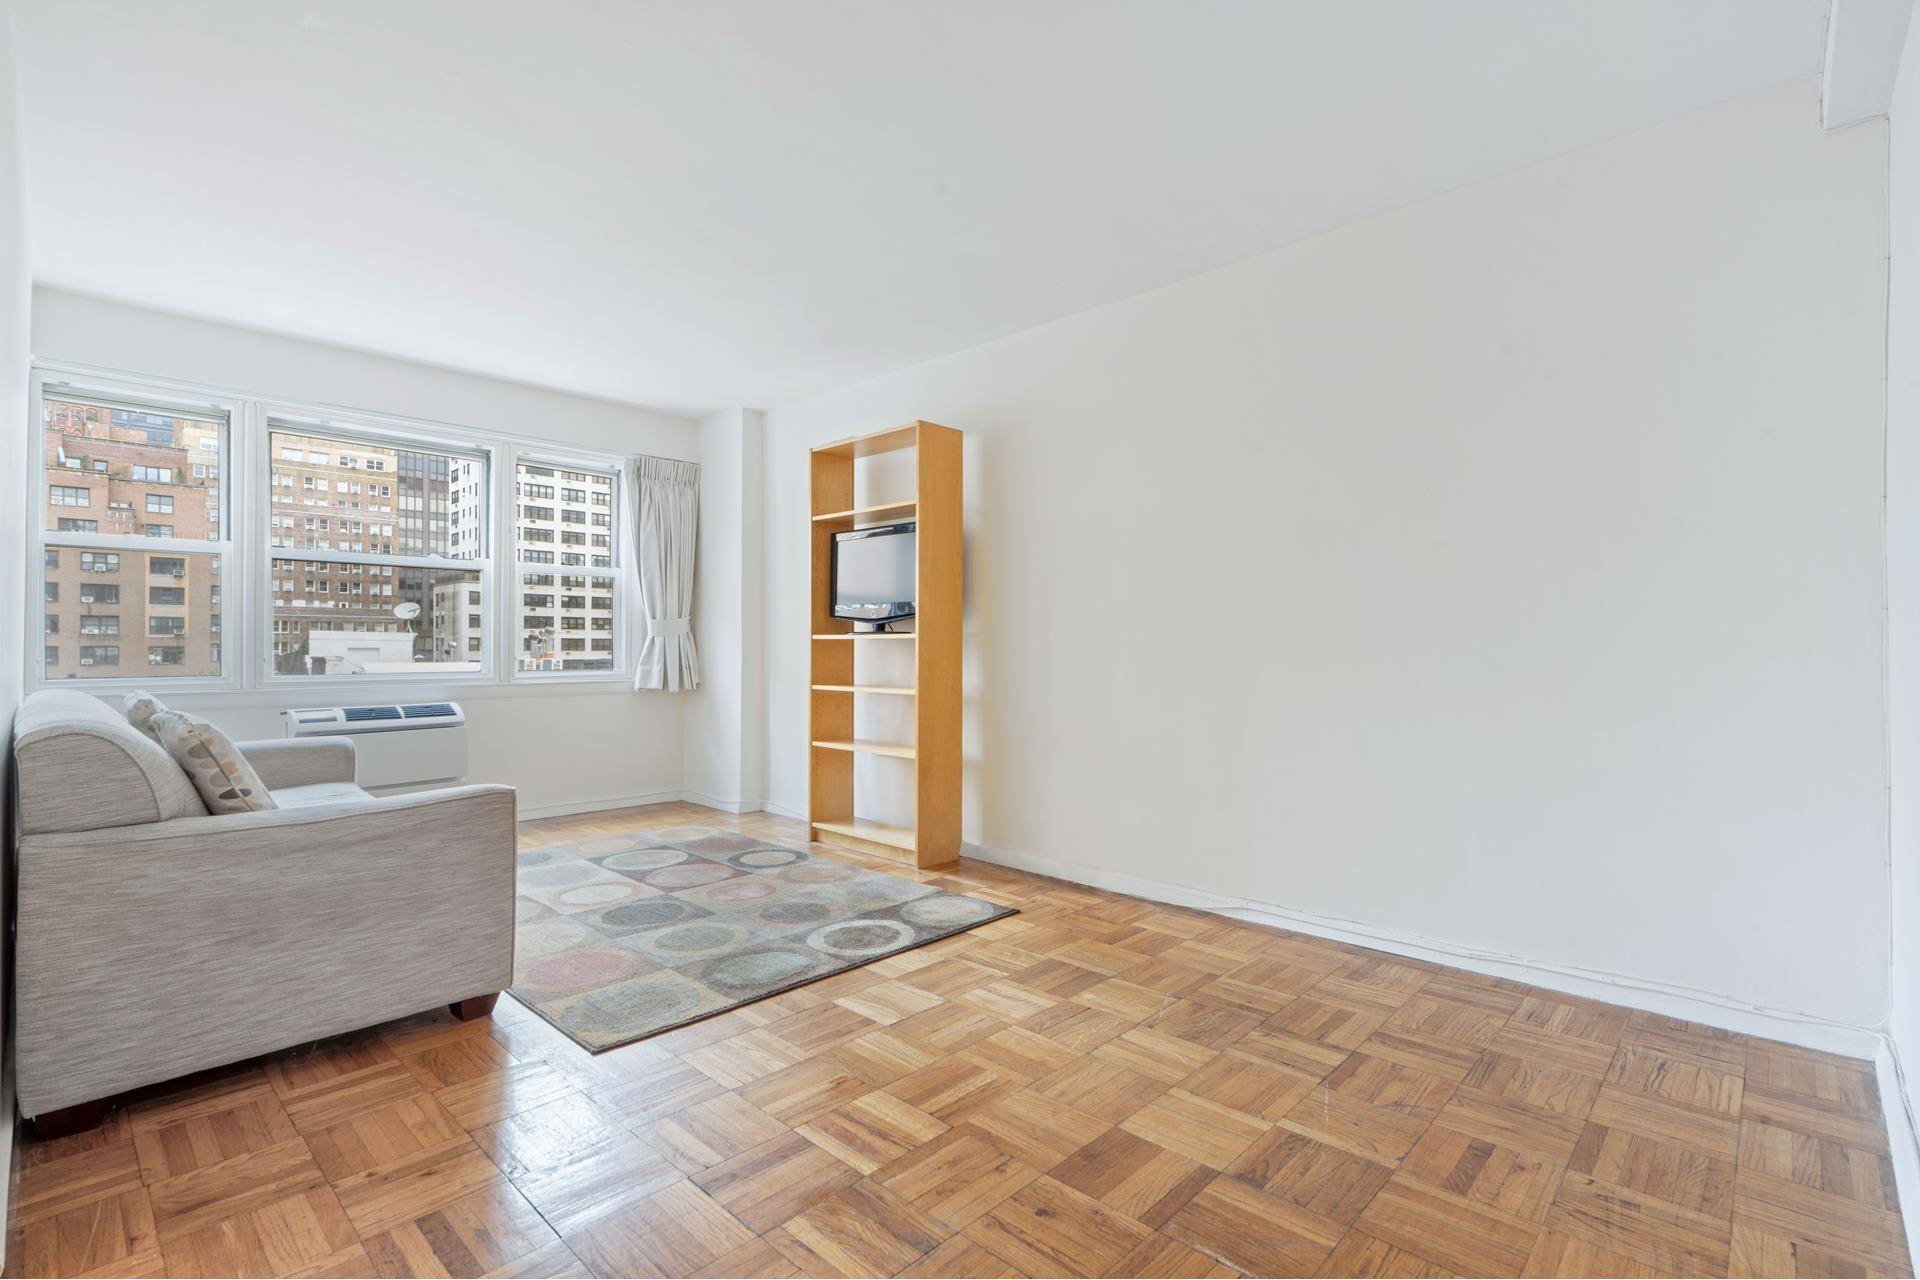 New North Facing, Converted 1 Bedroom at the 150 East 37th Street Condo beckons.